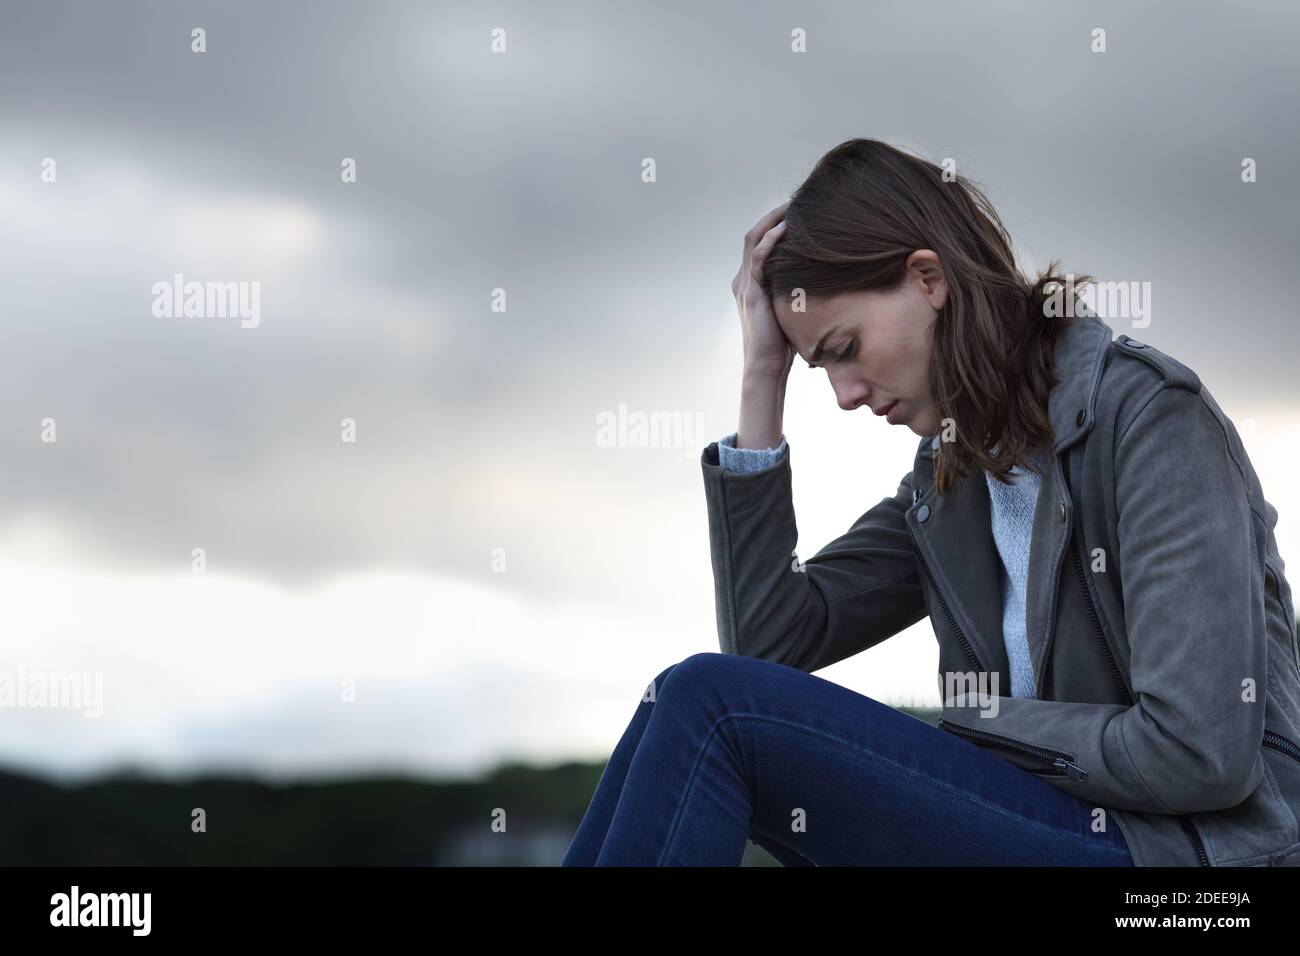 Profile of a sad woman complaining sitting alone in a cloudy day Stock Photo